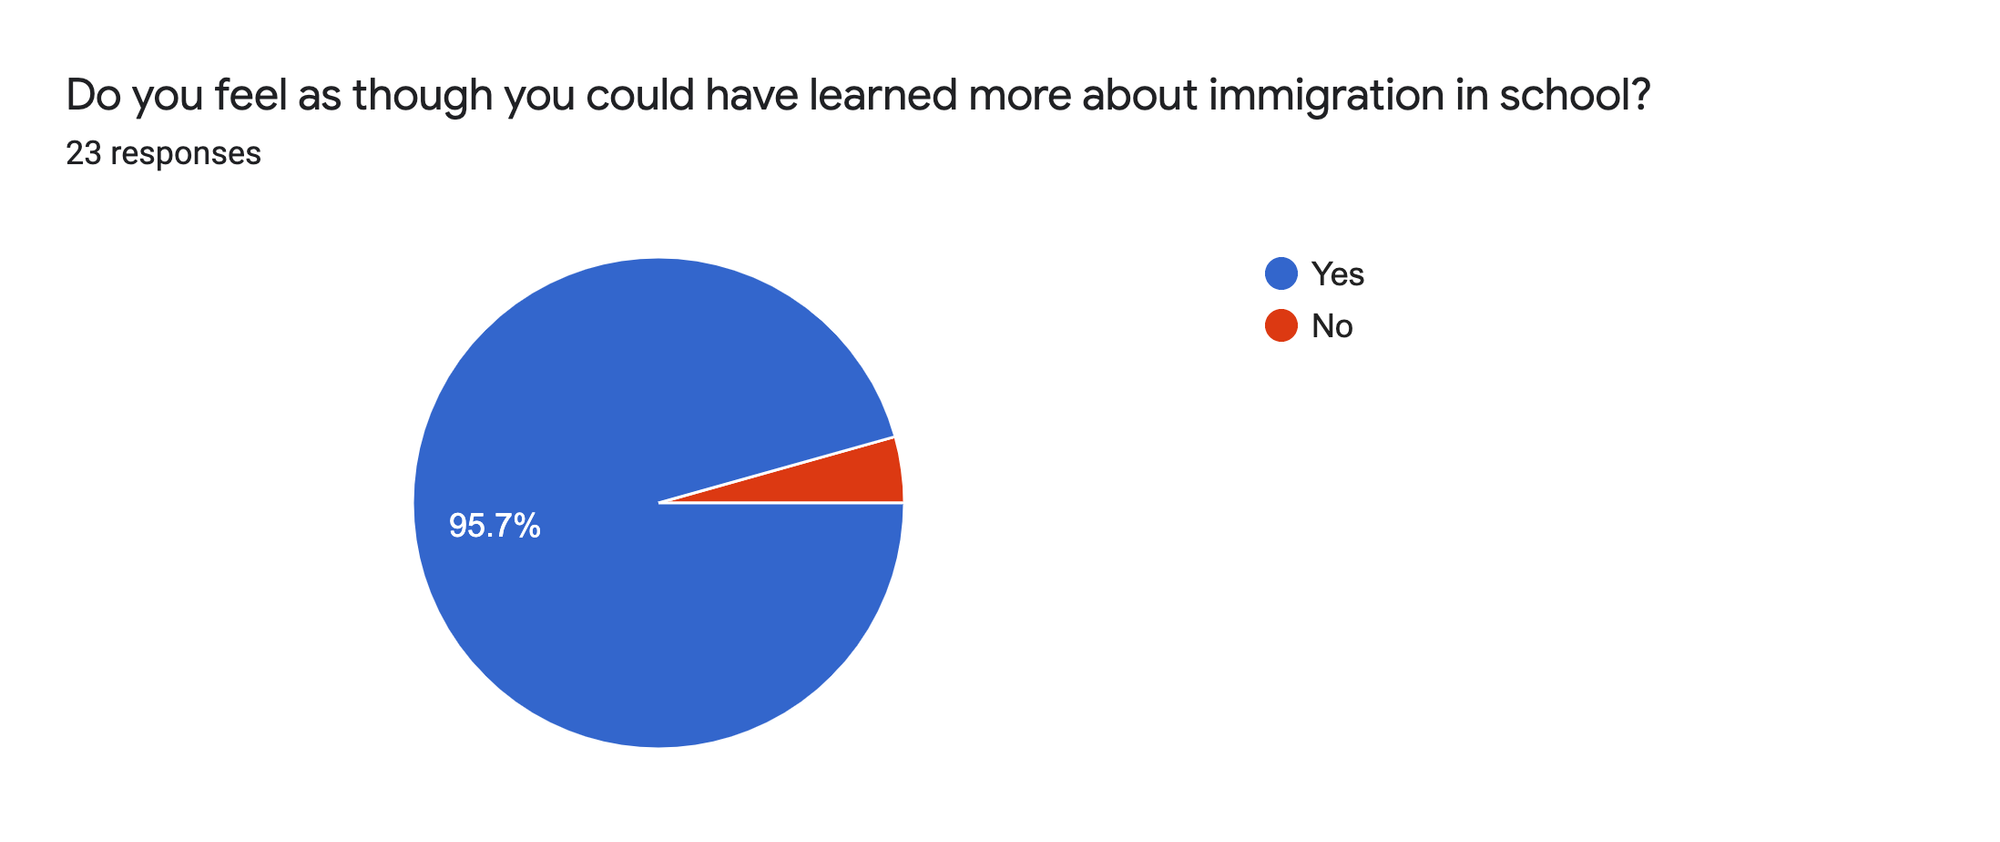 Forms response chart. Question title: Do you feel as though you could have learned more about immigration in school?. Number of responses: 23 responses.